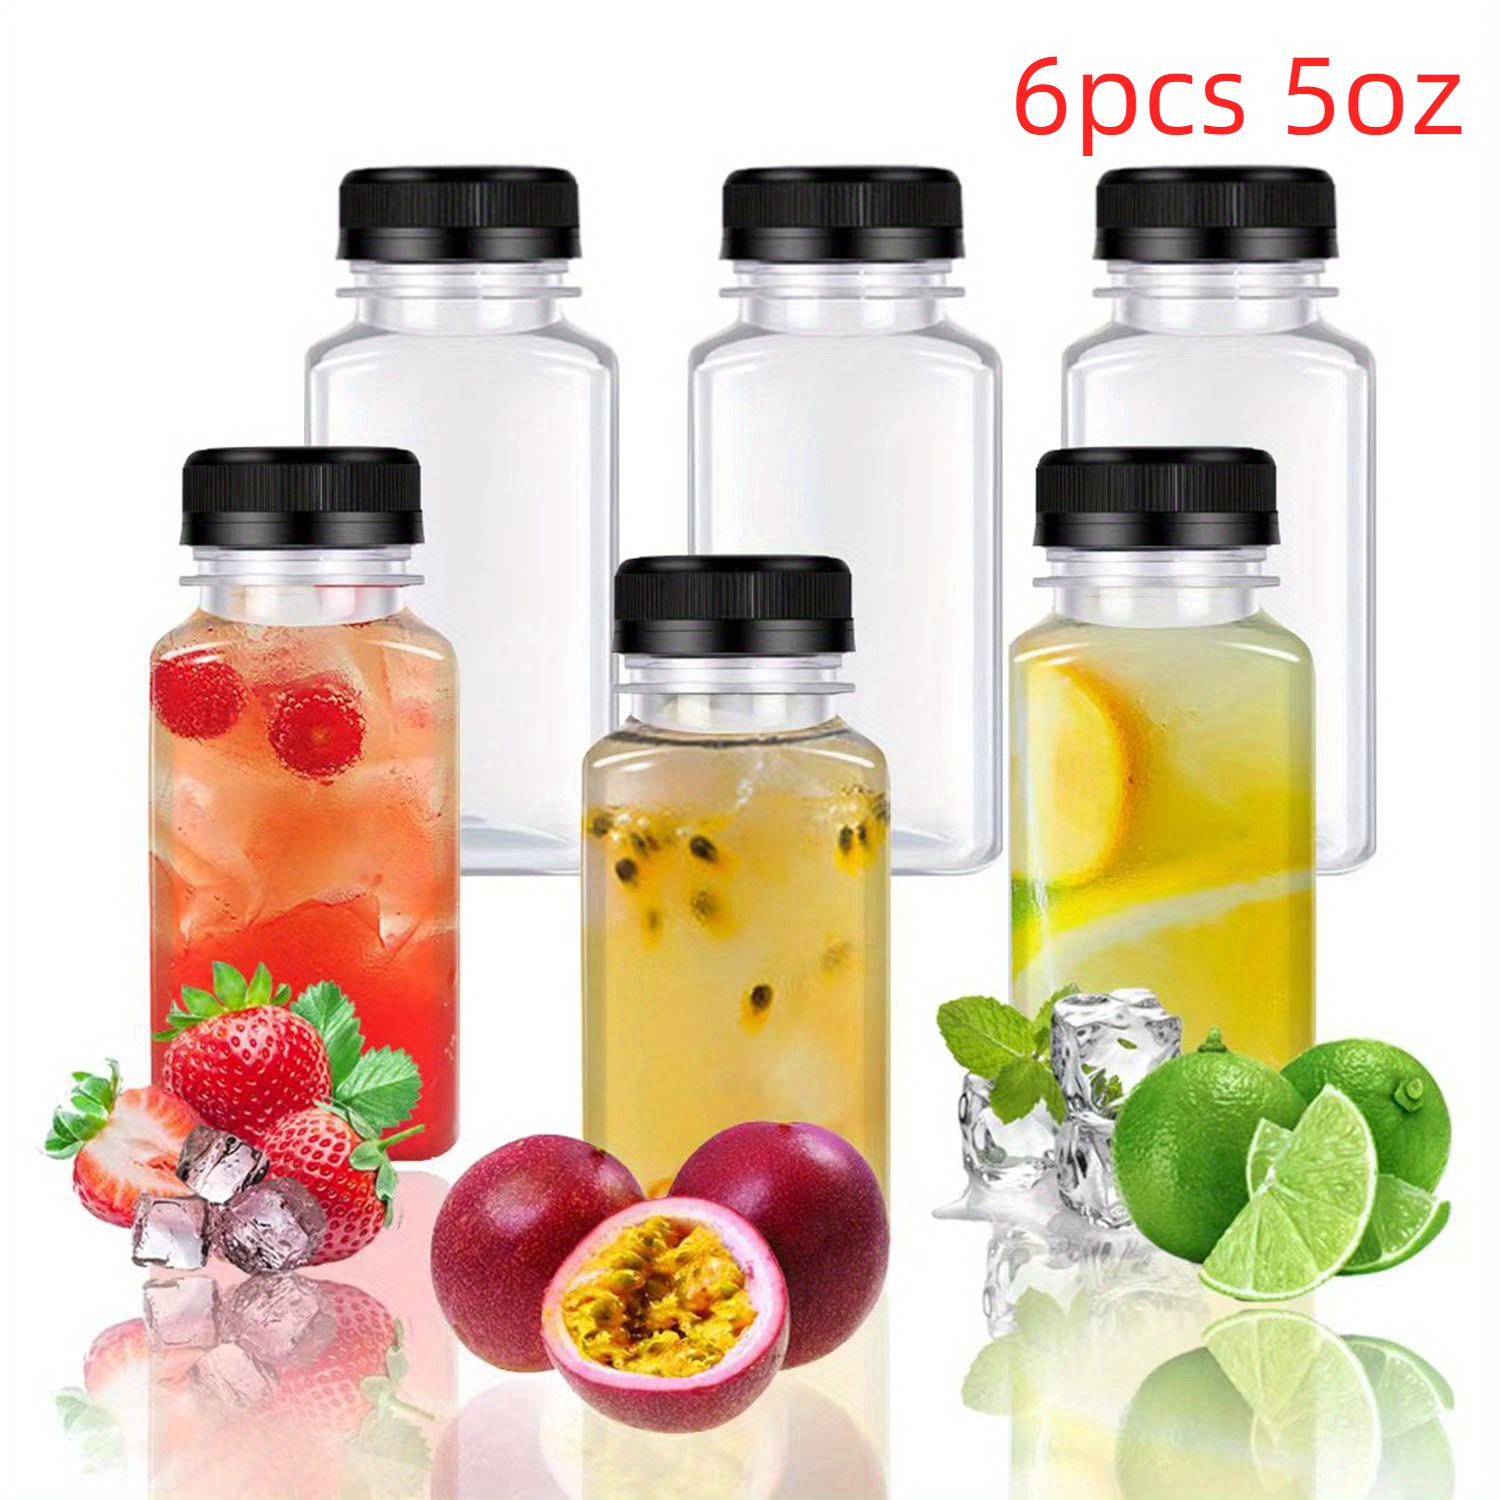 8 OZ plastic juice bottles 12 Pack - 8oz plastic bottles with caps, small juice  containers with